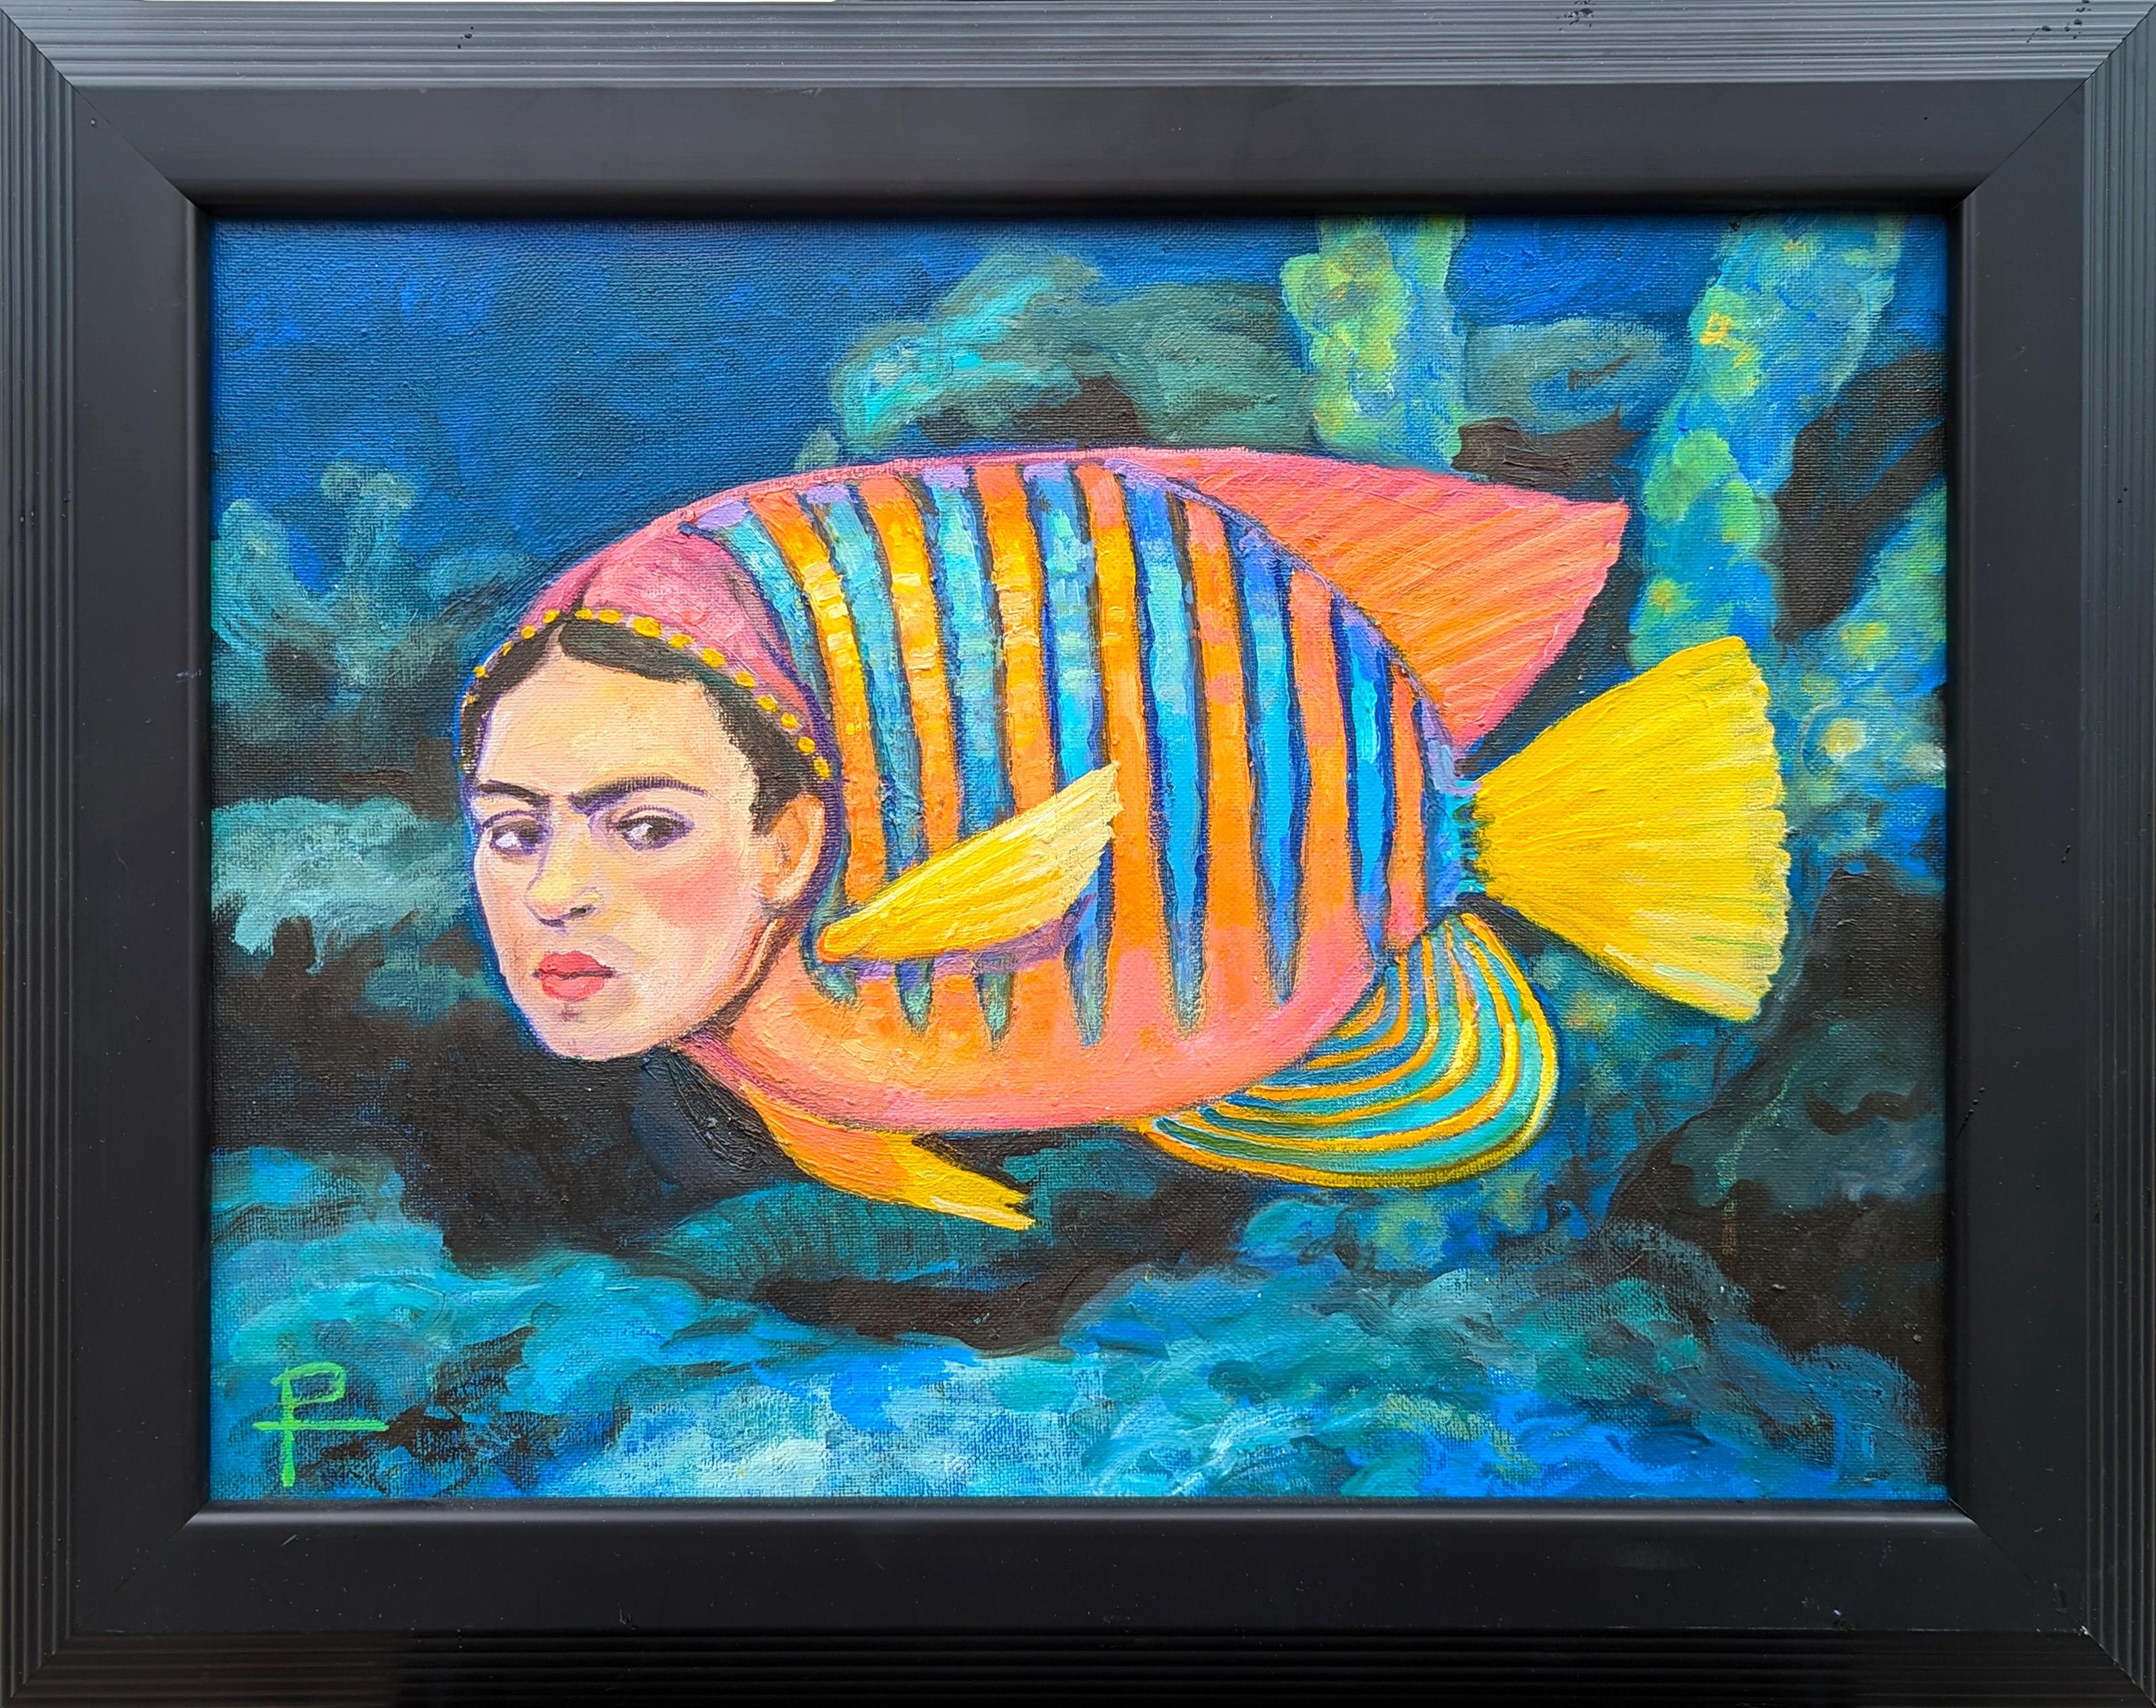 Henry David Potwin Landscape Painting - "Frida Fish" Contemporary Surrealist Jewel Toned Tropical Ocean Life Painting